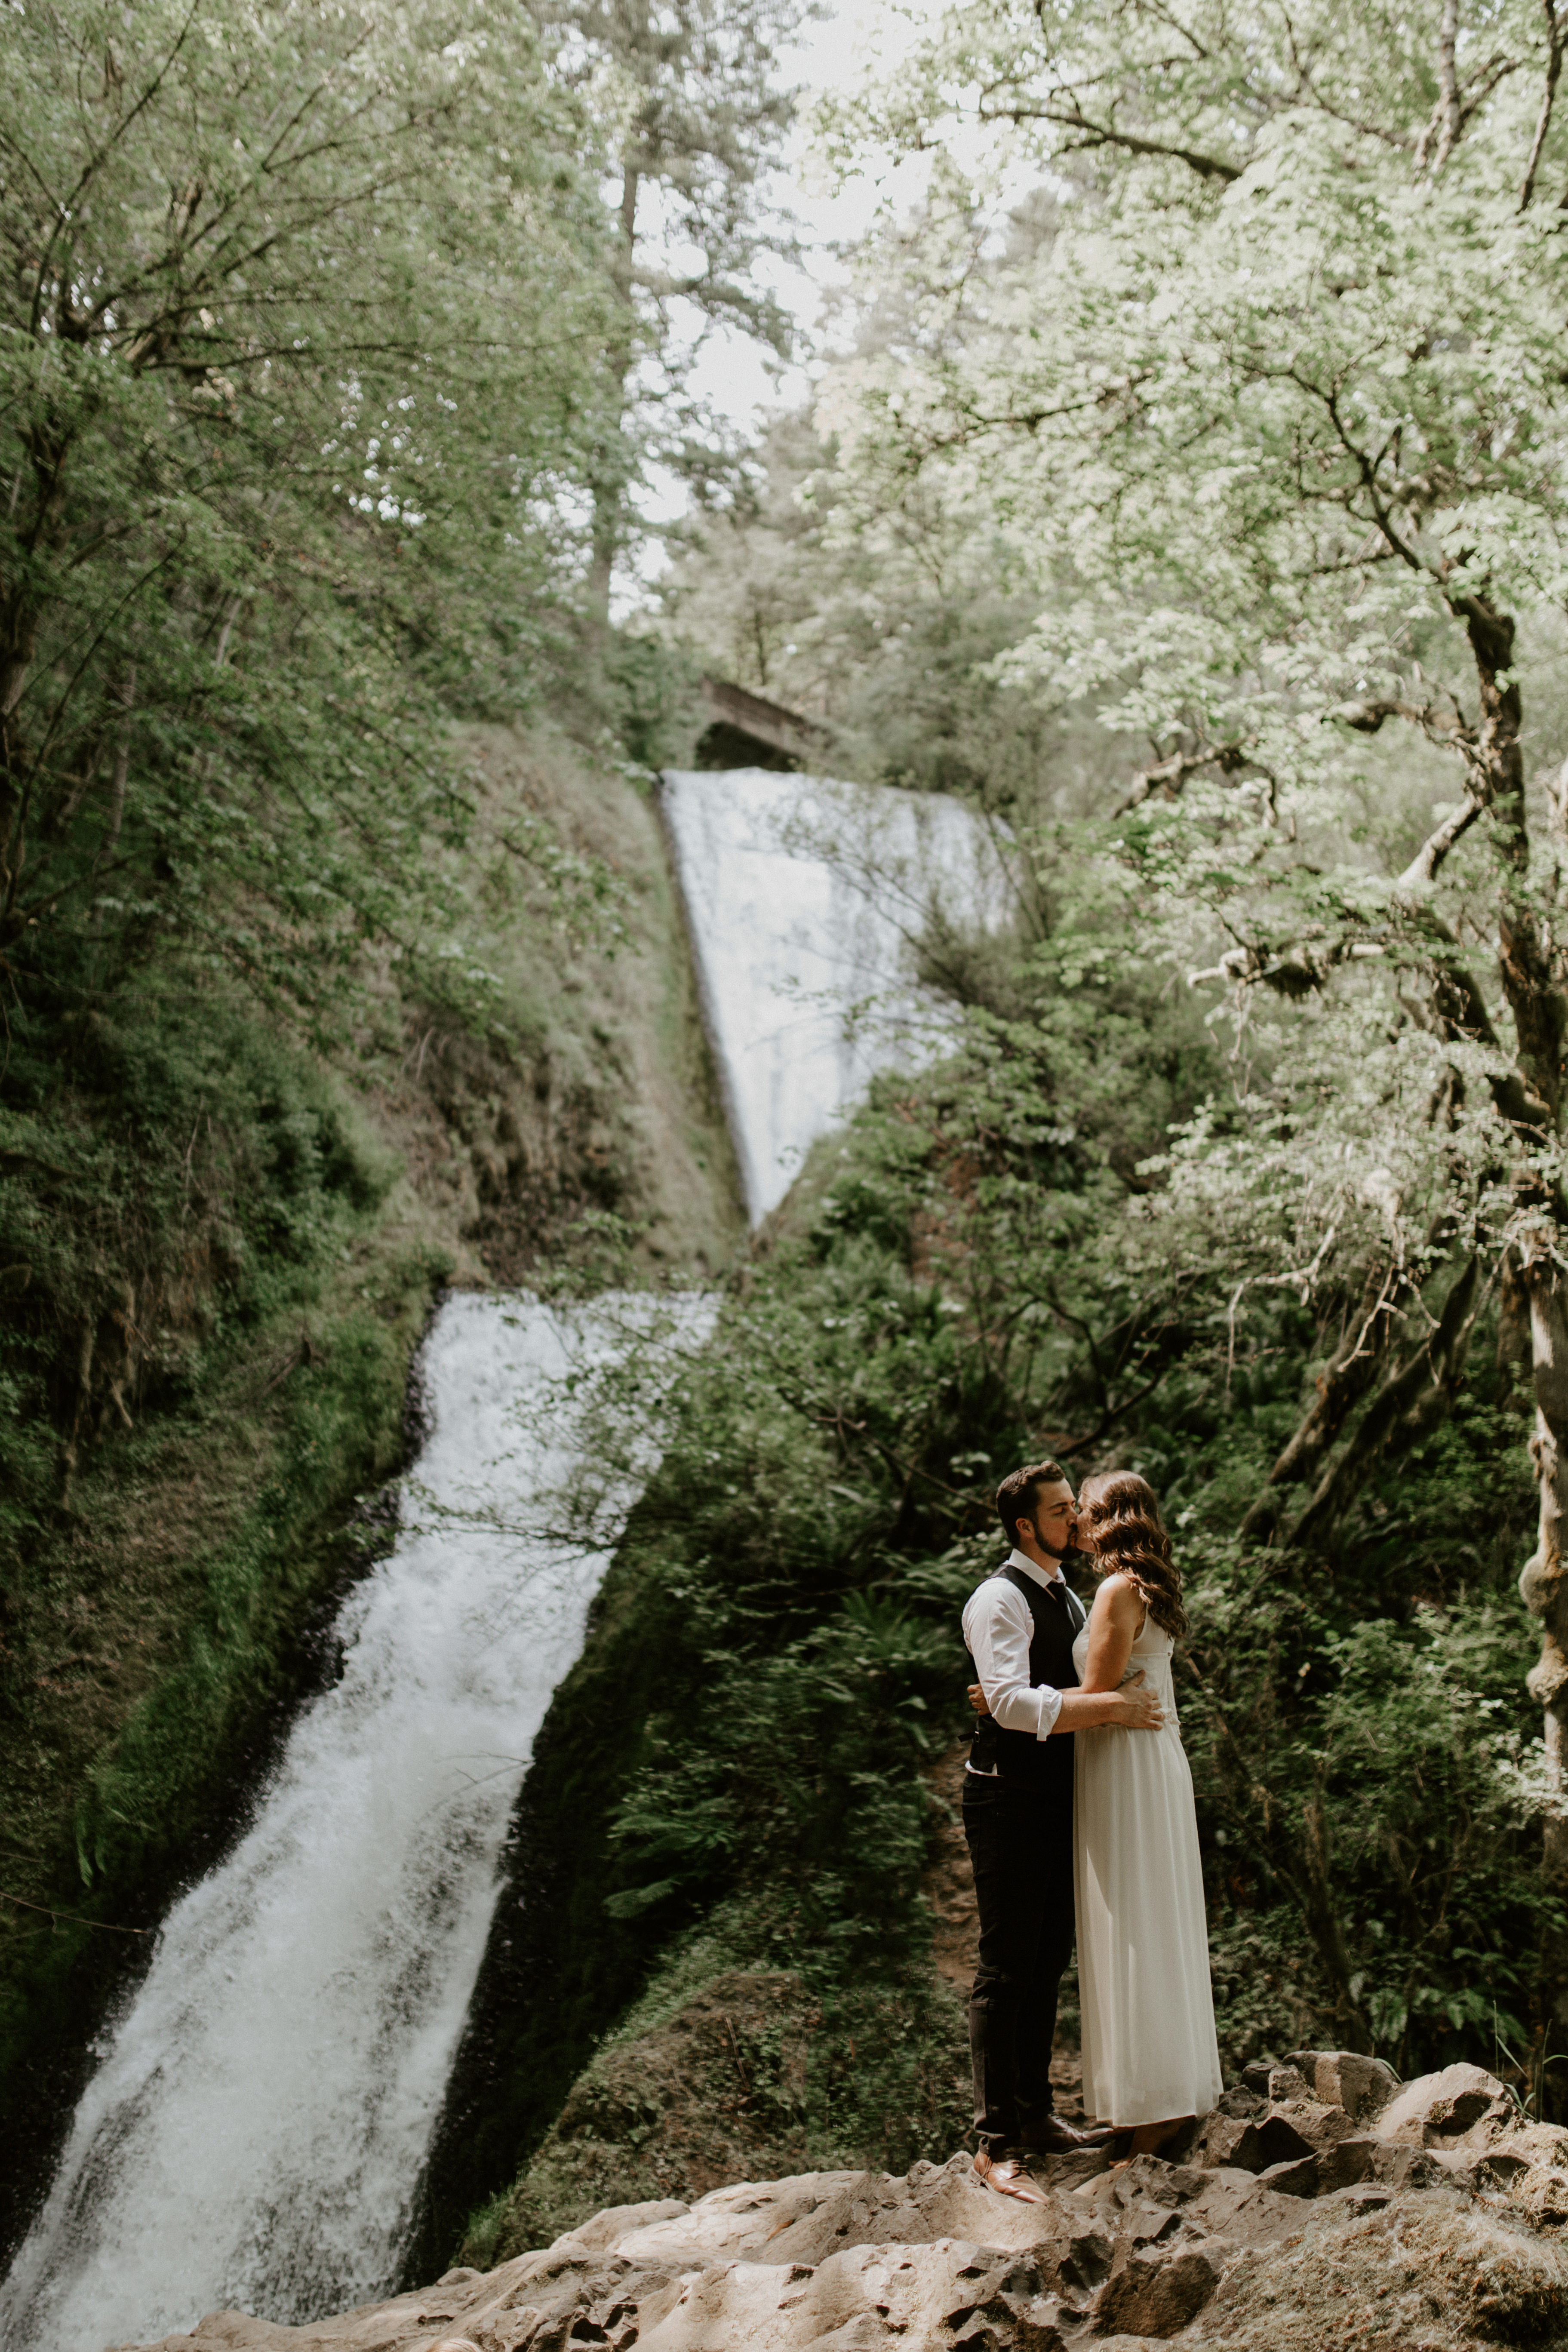 Emily and Josh embracing at the Columbia Gorge, Oregon. Elopement photography in Portland Oregon by Sienna Plus Josh.